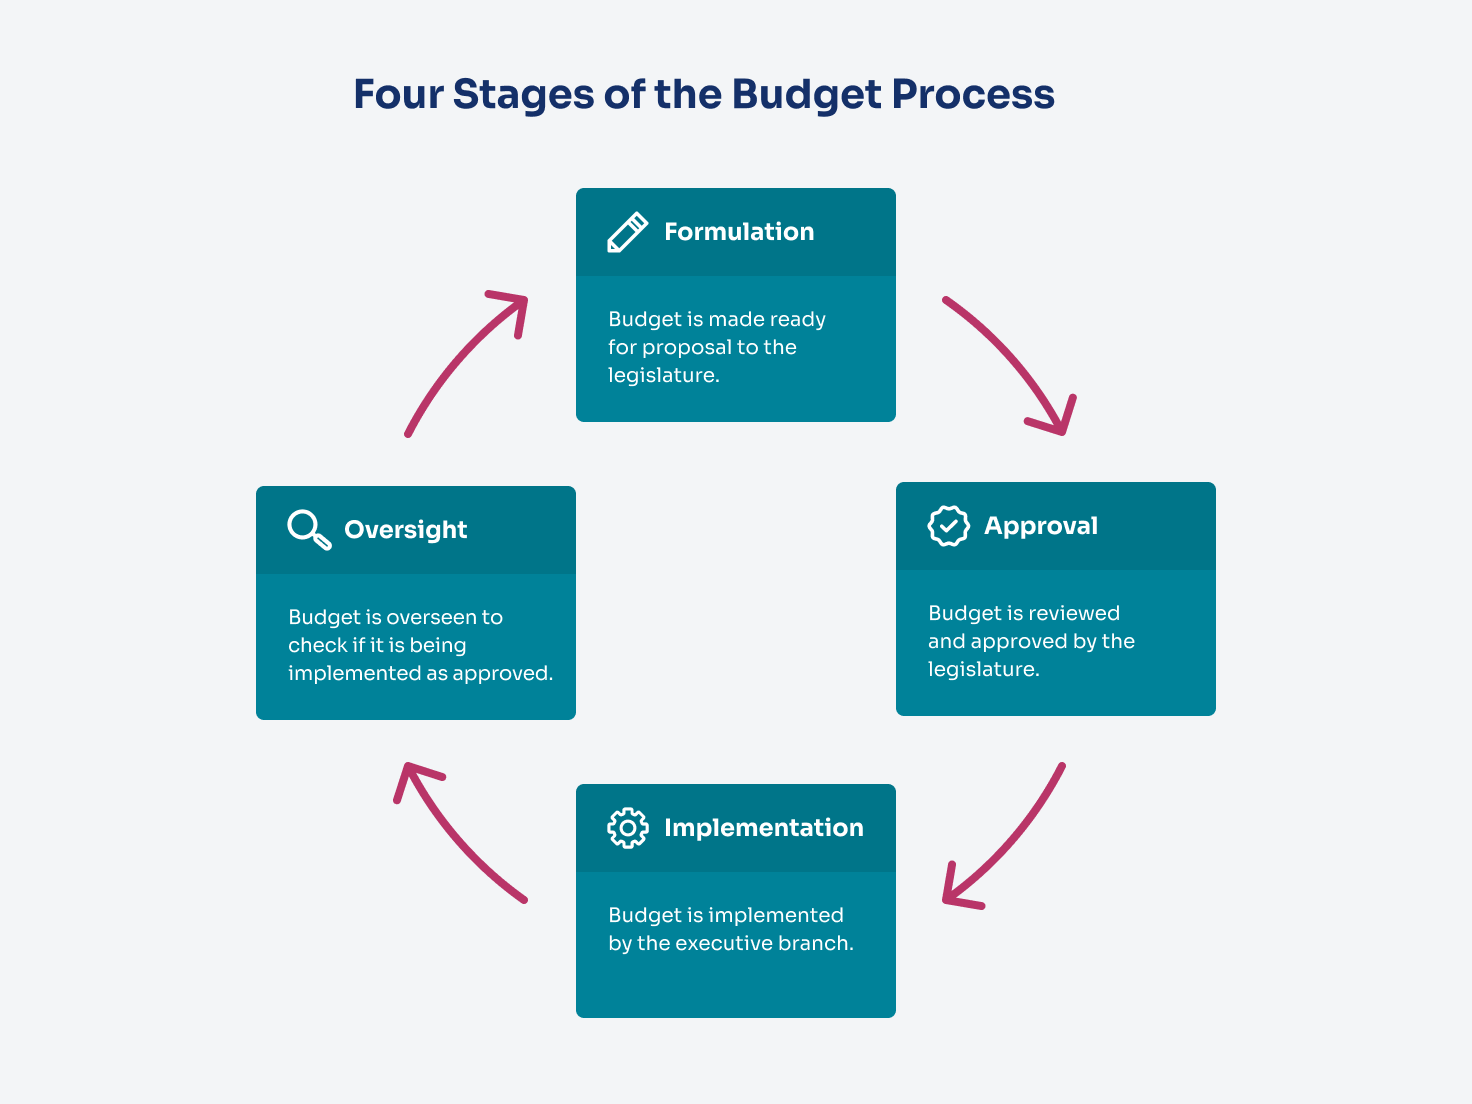 The four stages of the budget process cycle